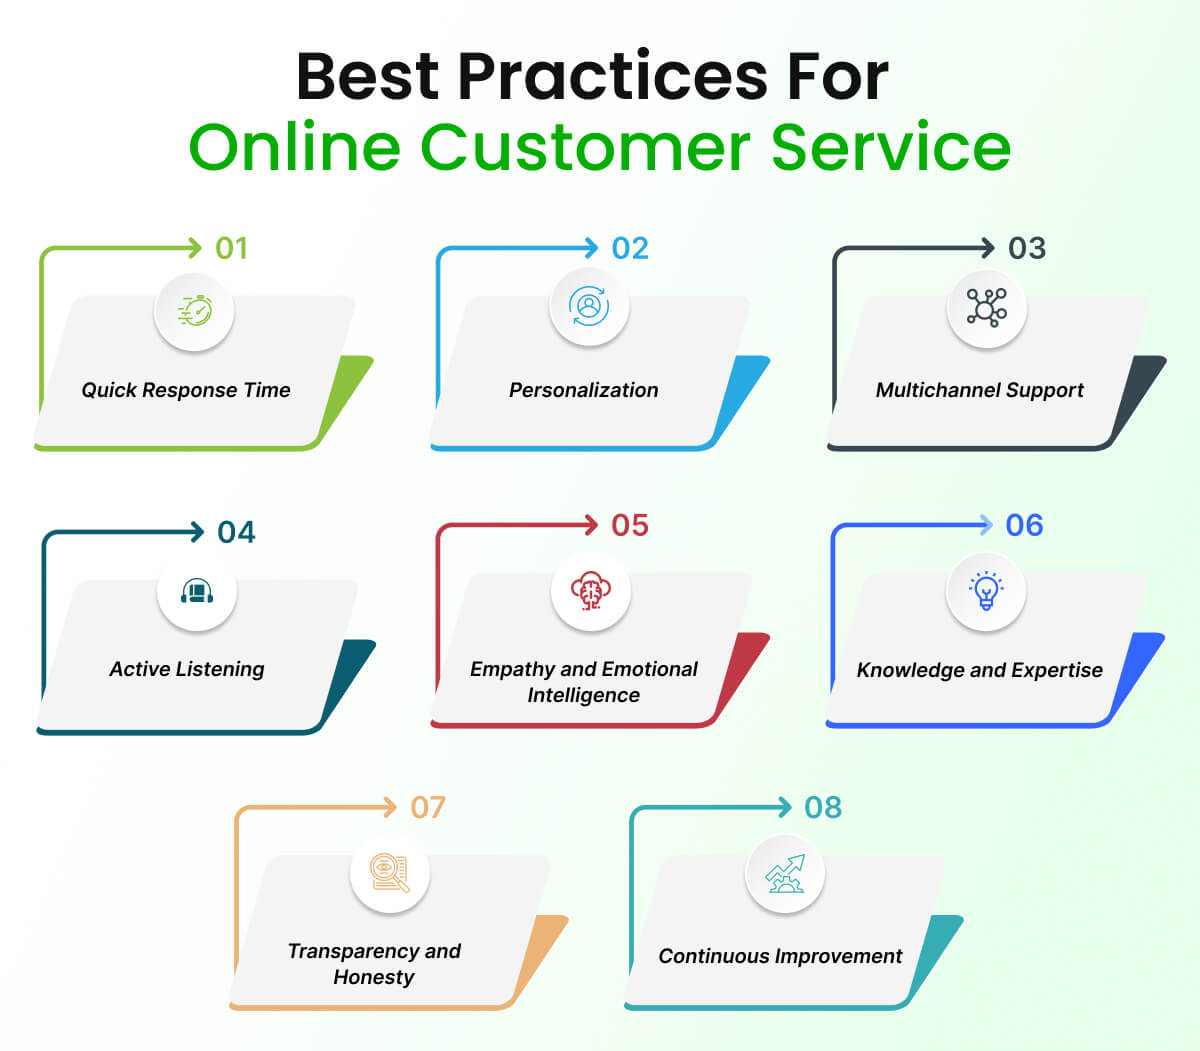 Best Practices for Online Customer Service